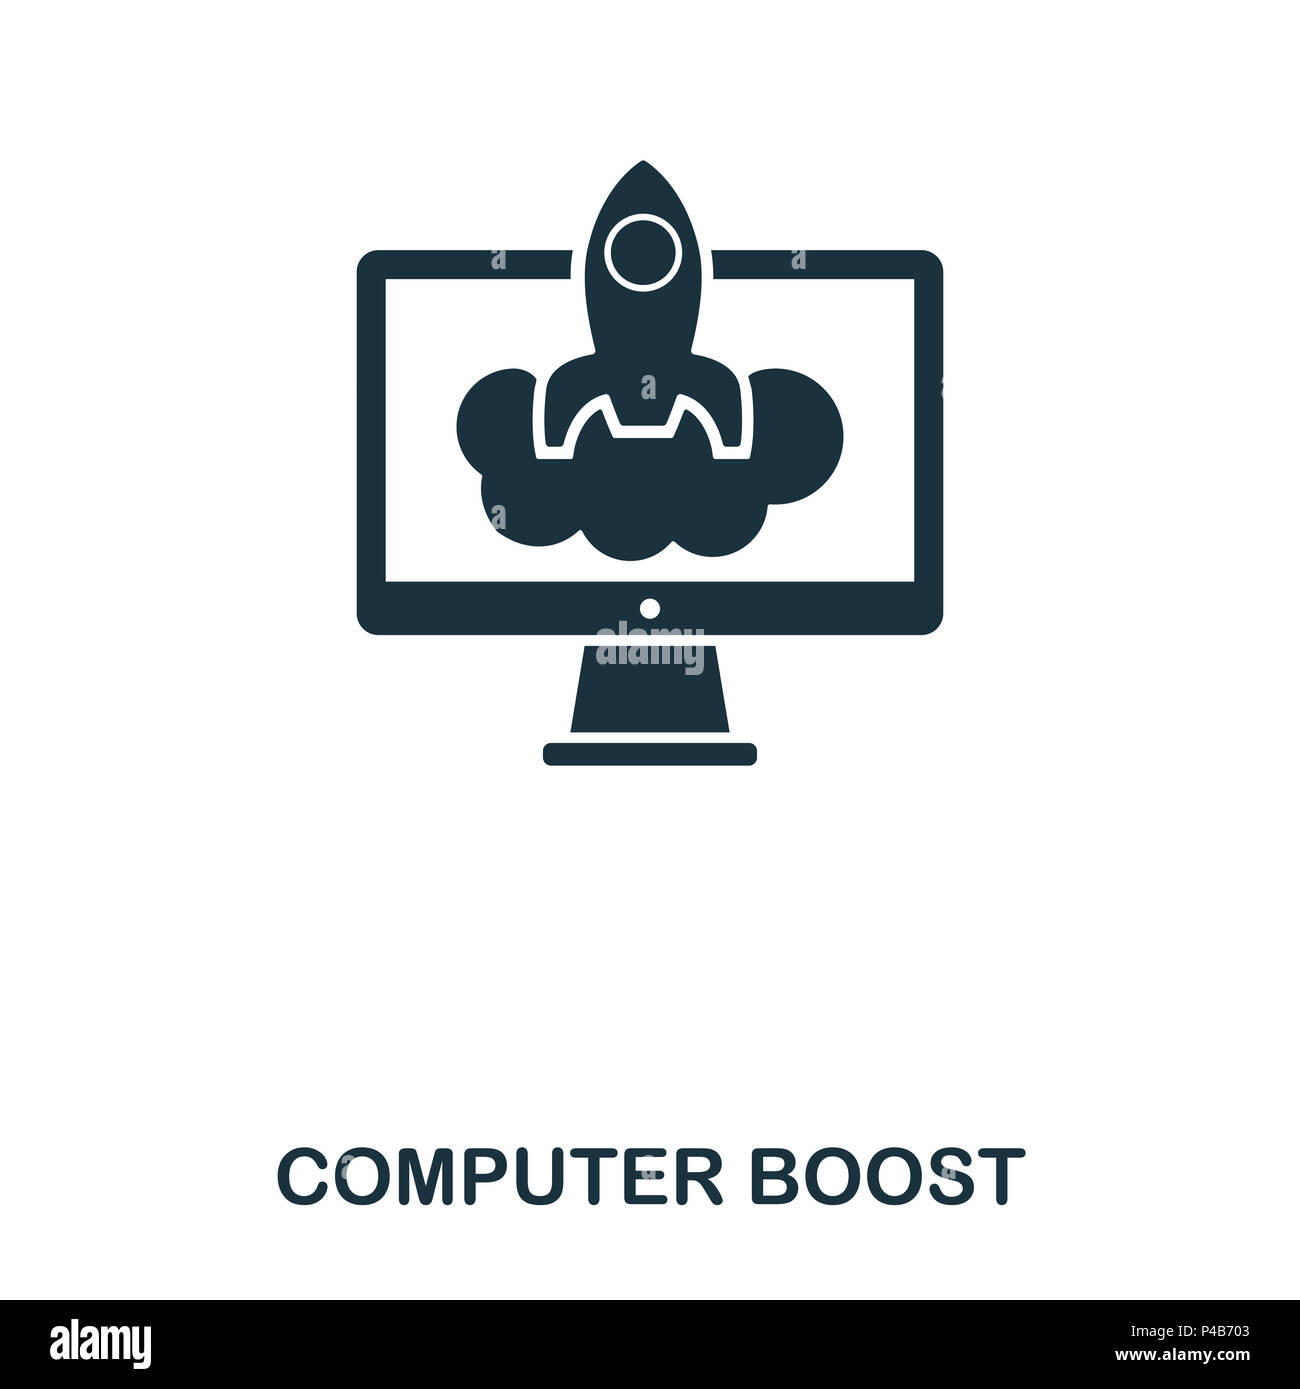 Computer Boost icon. Line style icon design. UI. Illustration of computer boost icon. Pictogram isolated on white. Ready to use in web design, apps, software, print. Stock Photo